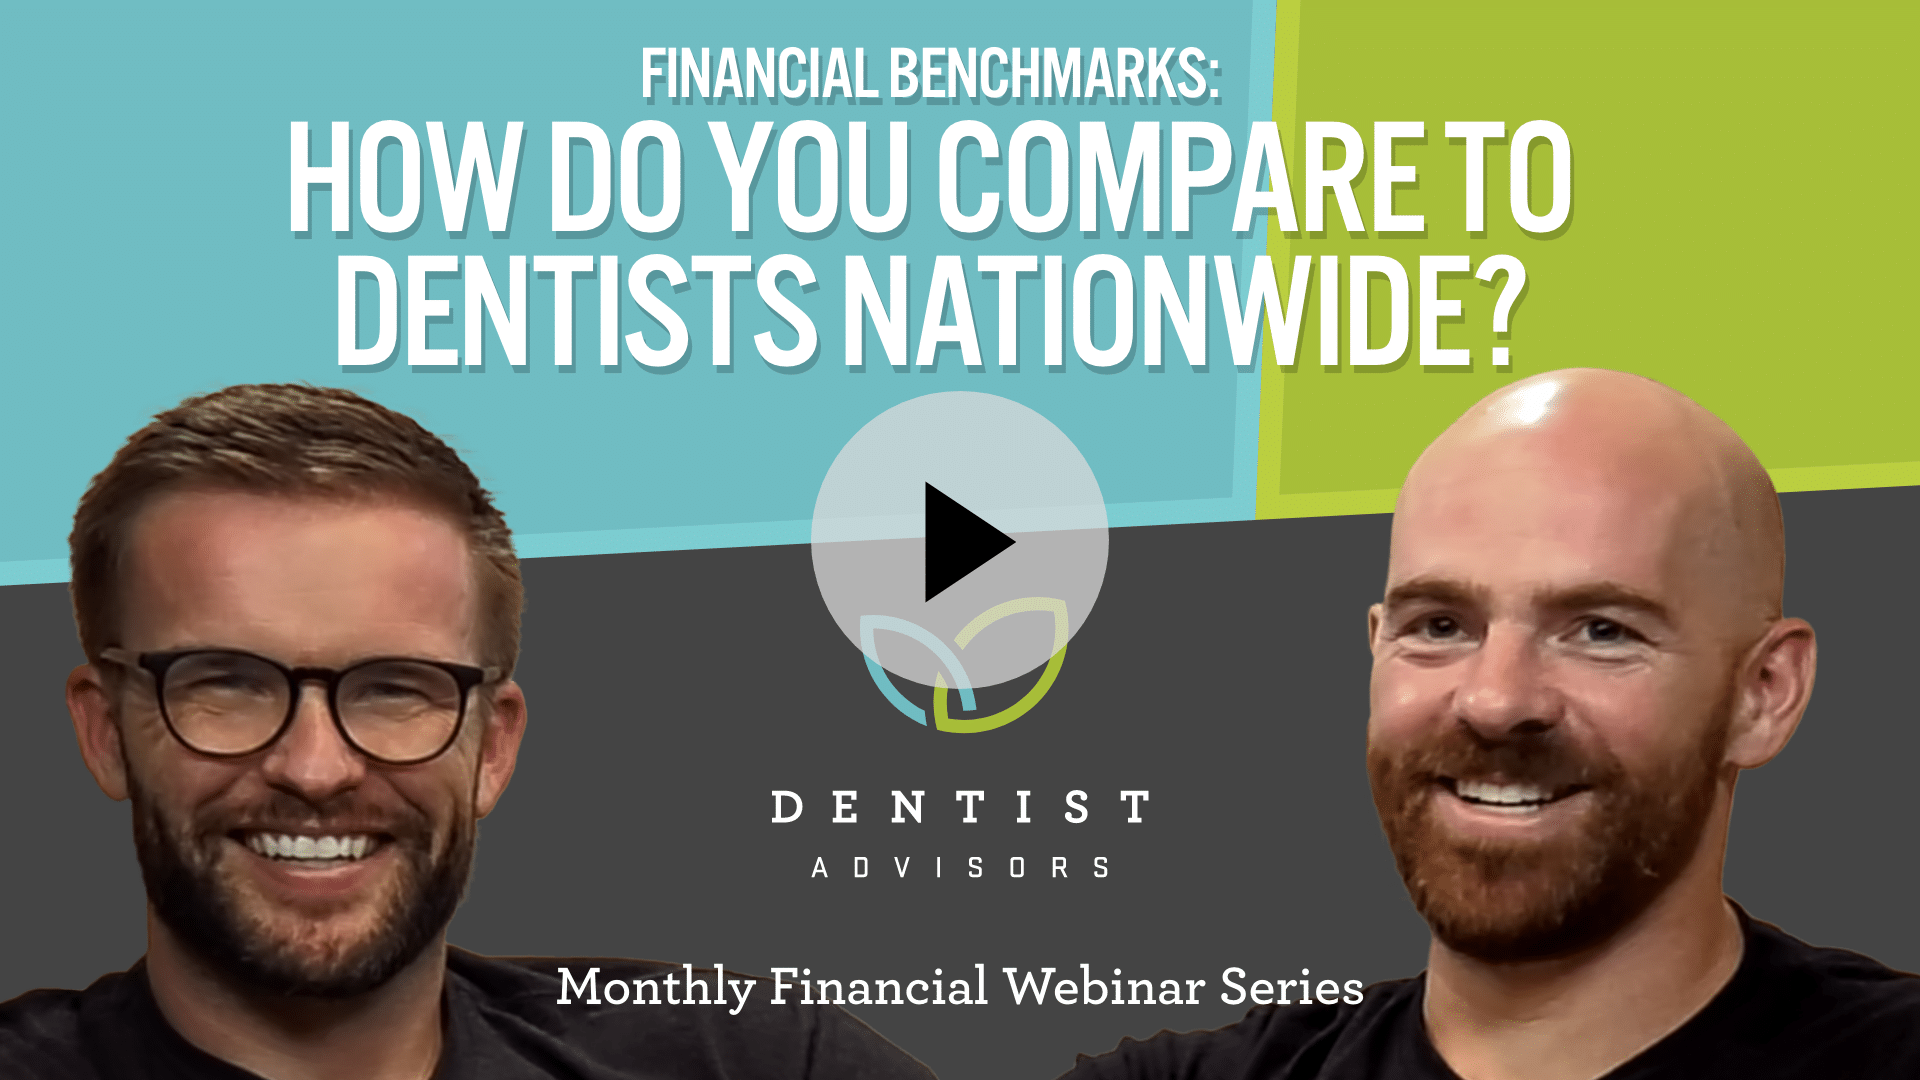 Financial Benchmarks for Dentists